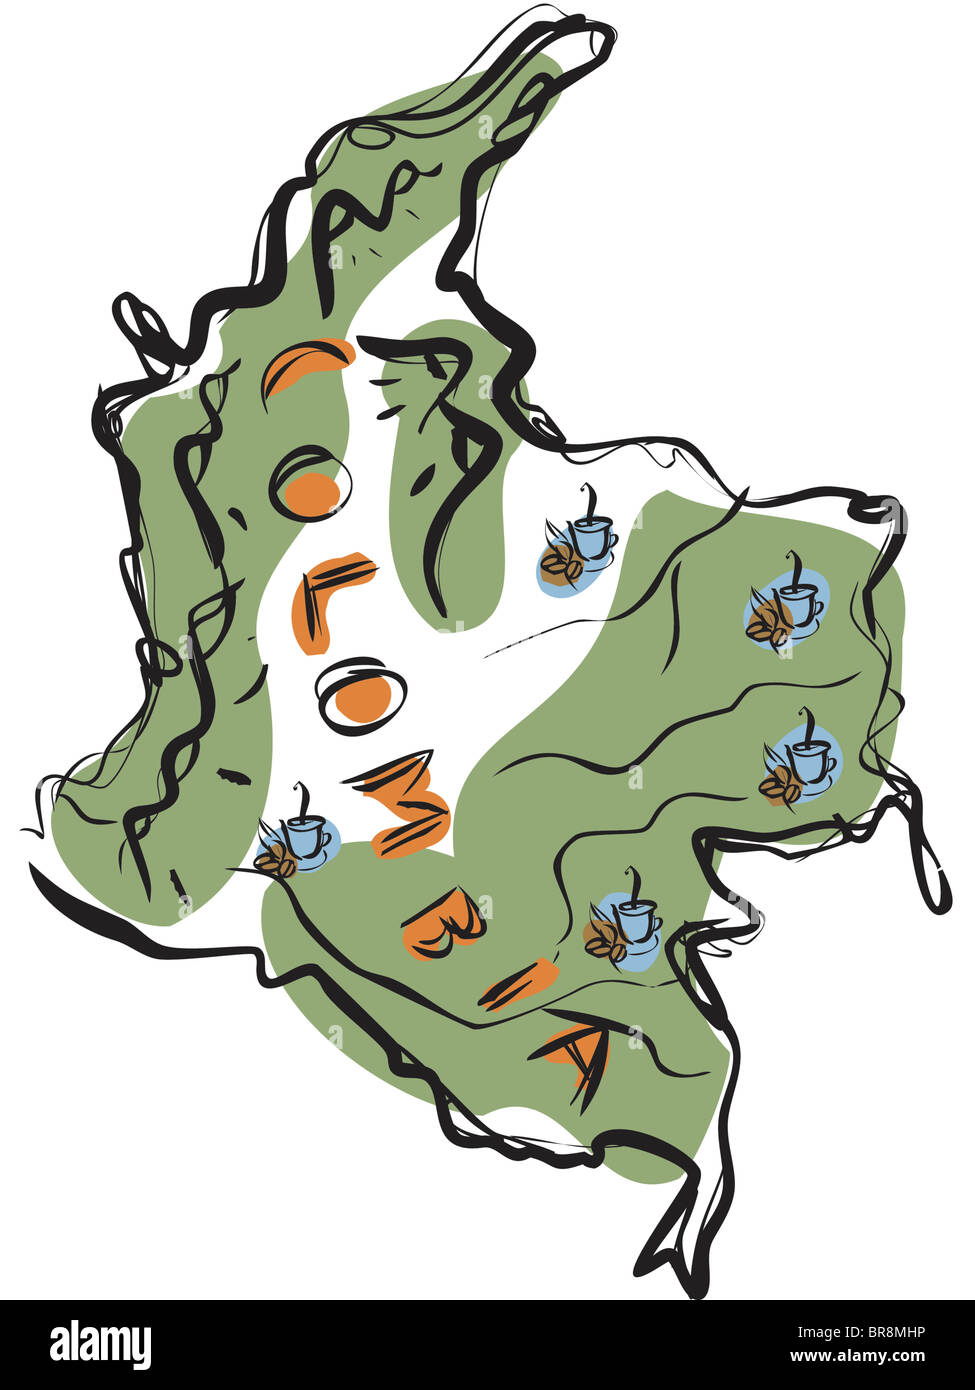 Map of Colombia Stock Photo